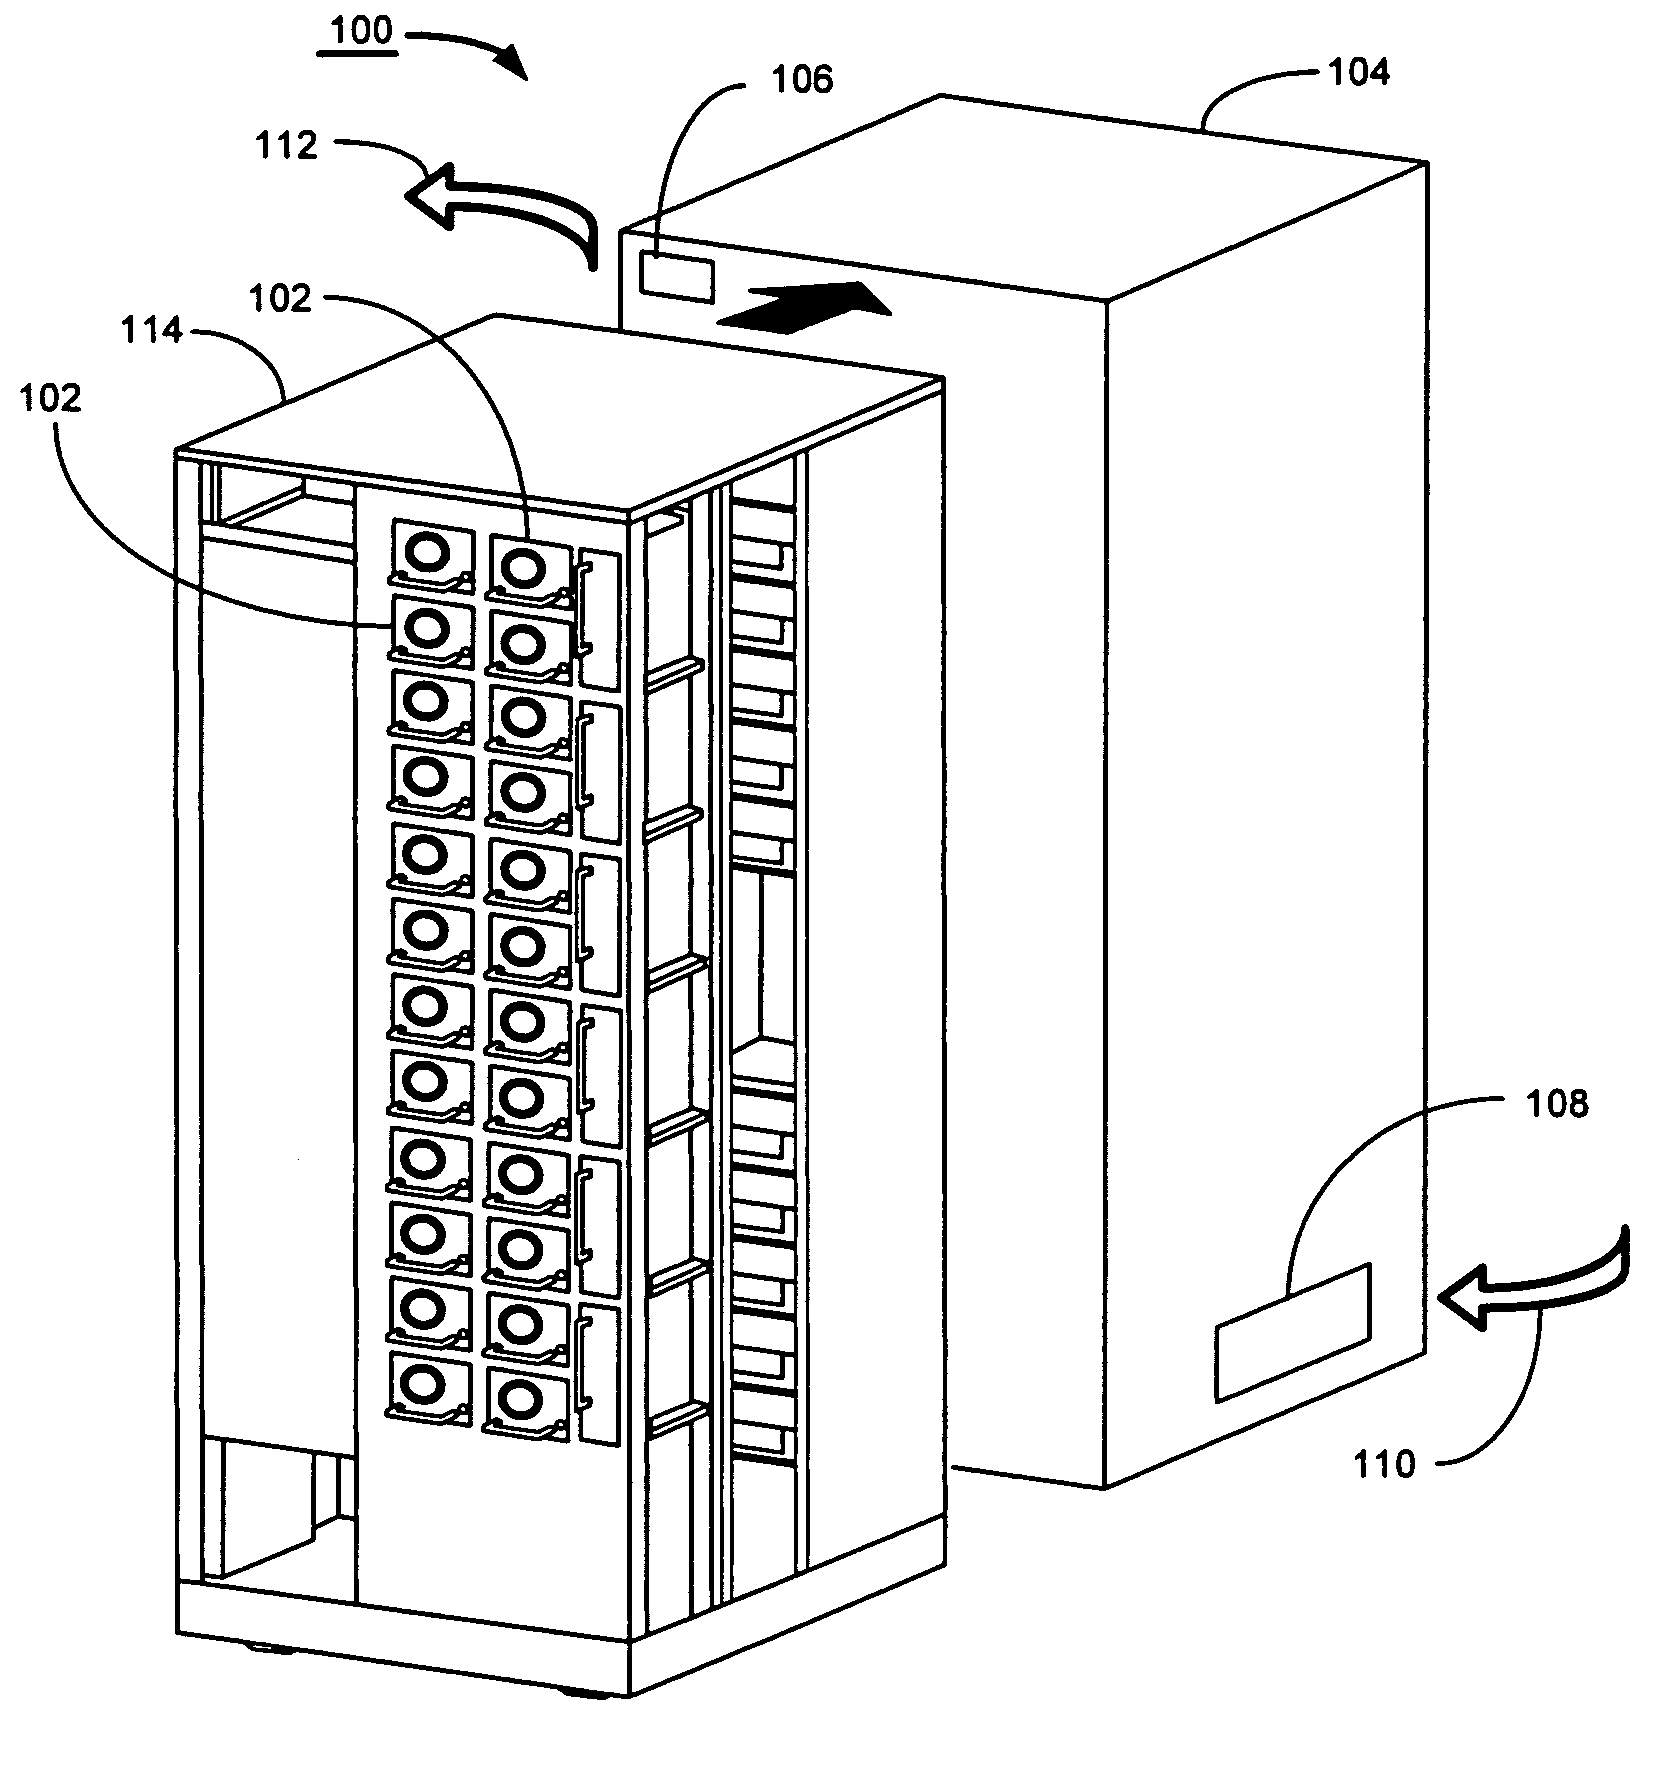 Method and apparatus for adsorbing molecules from an atmosphere inside an enclosure containing multiple data storage devices